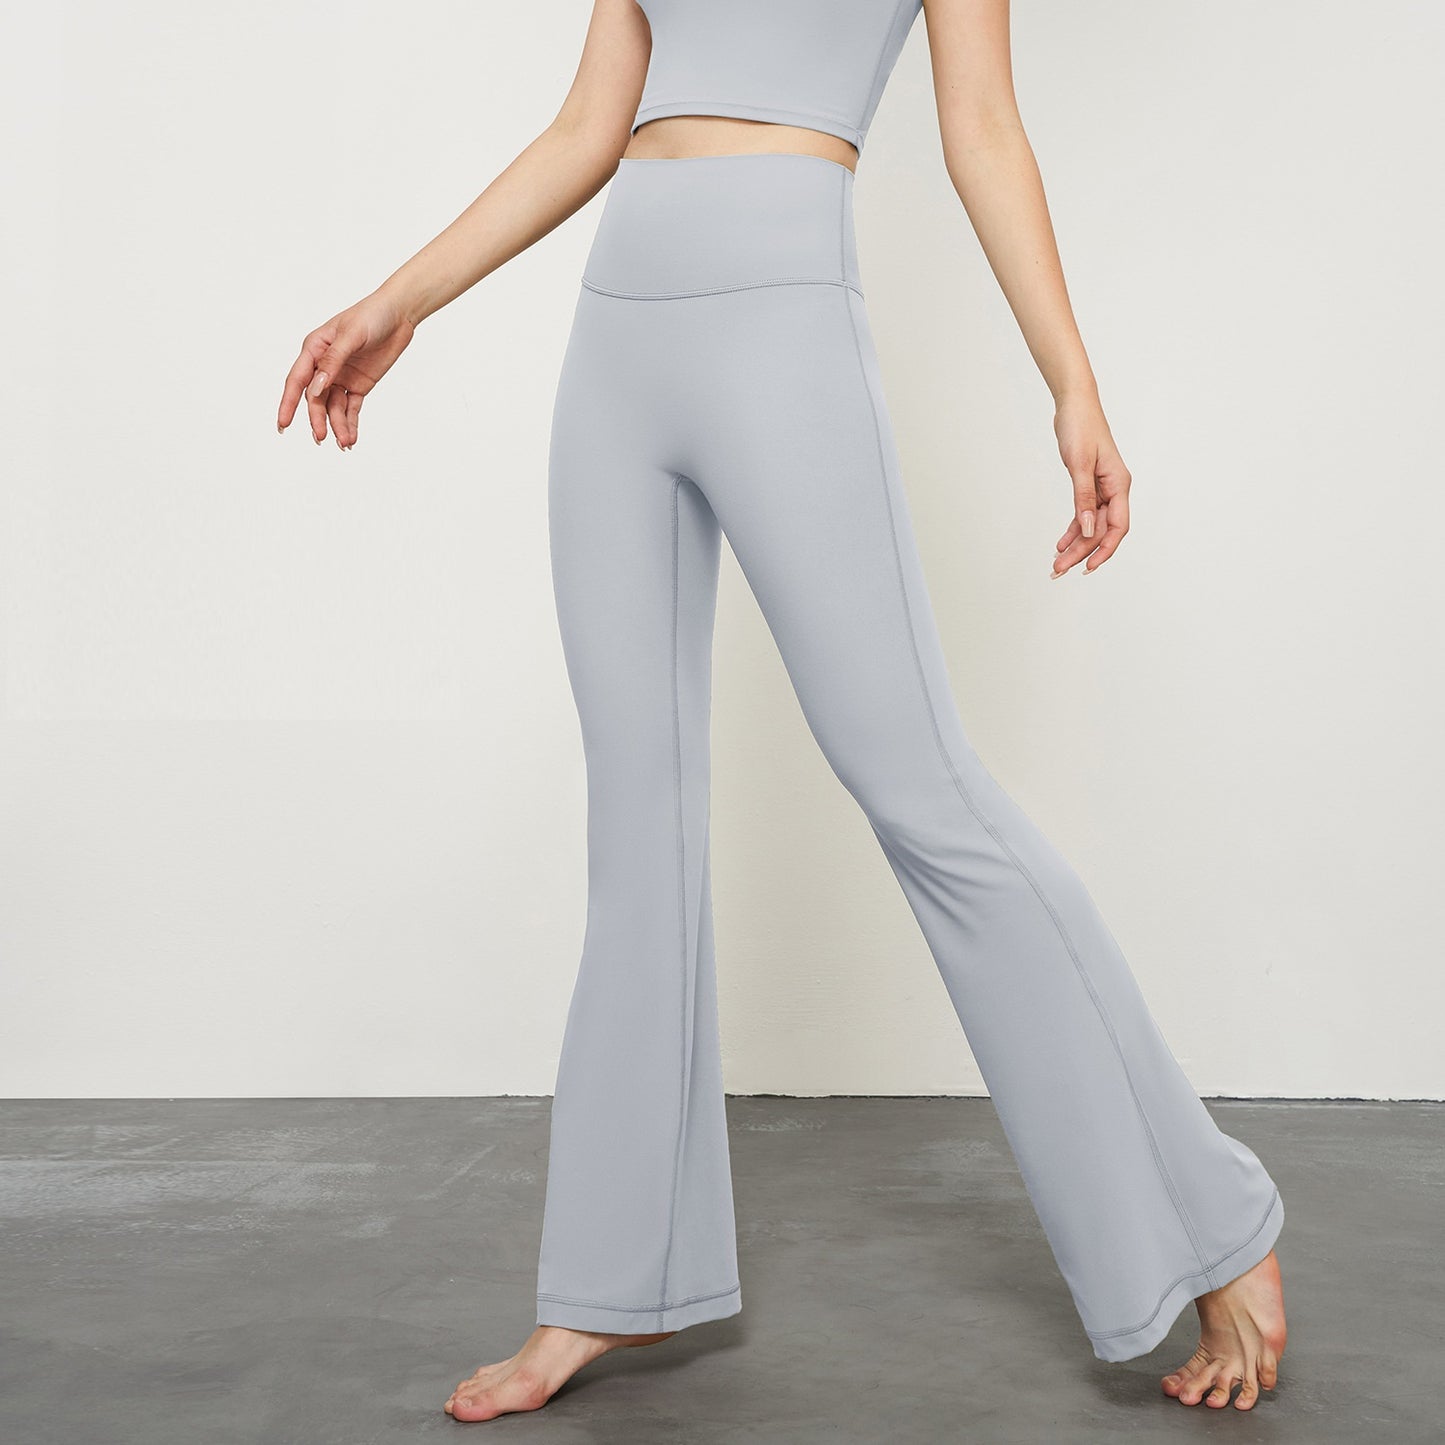 SBCK41037-spring and summer new nude yoga trousers